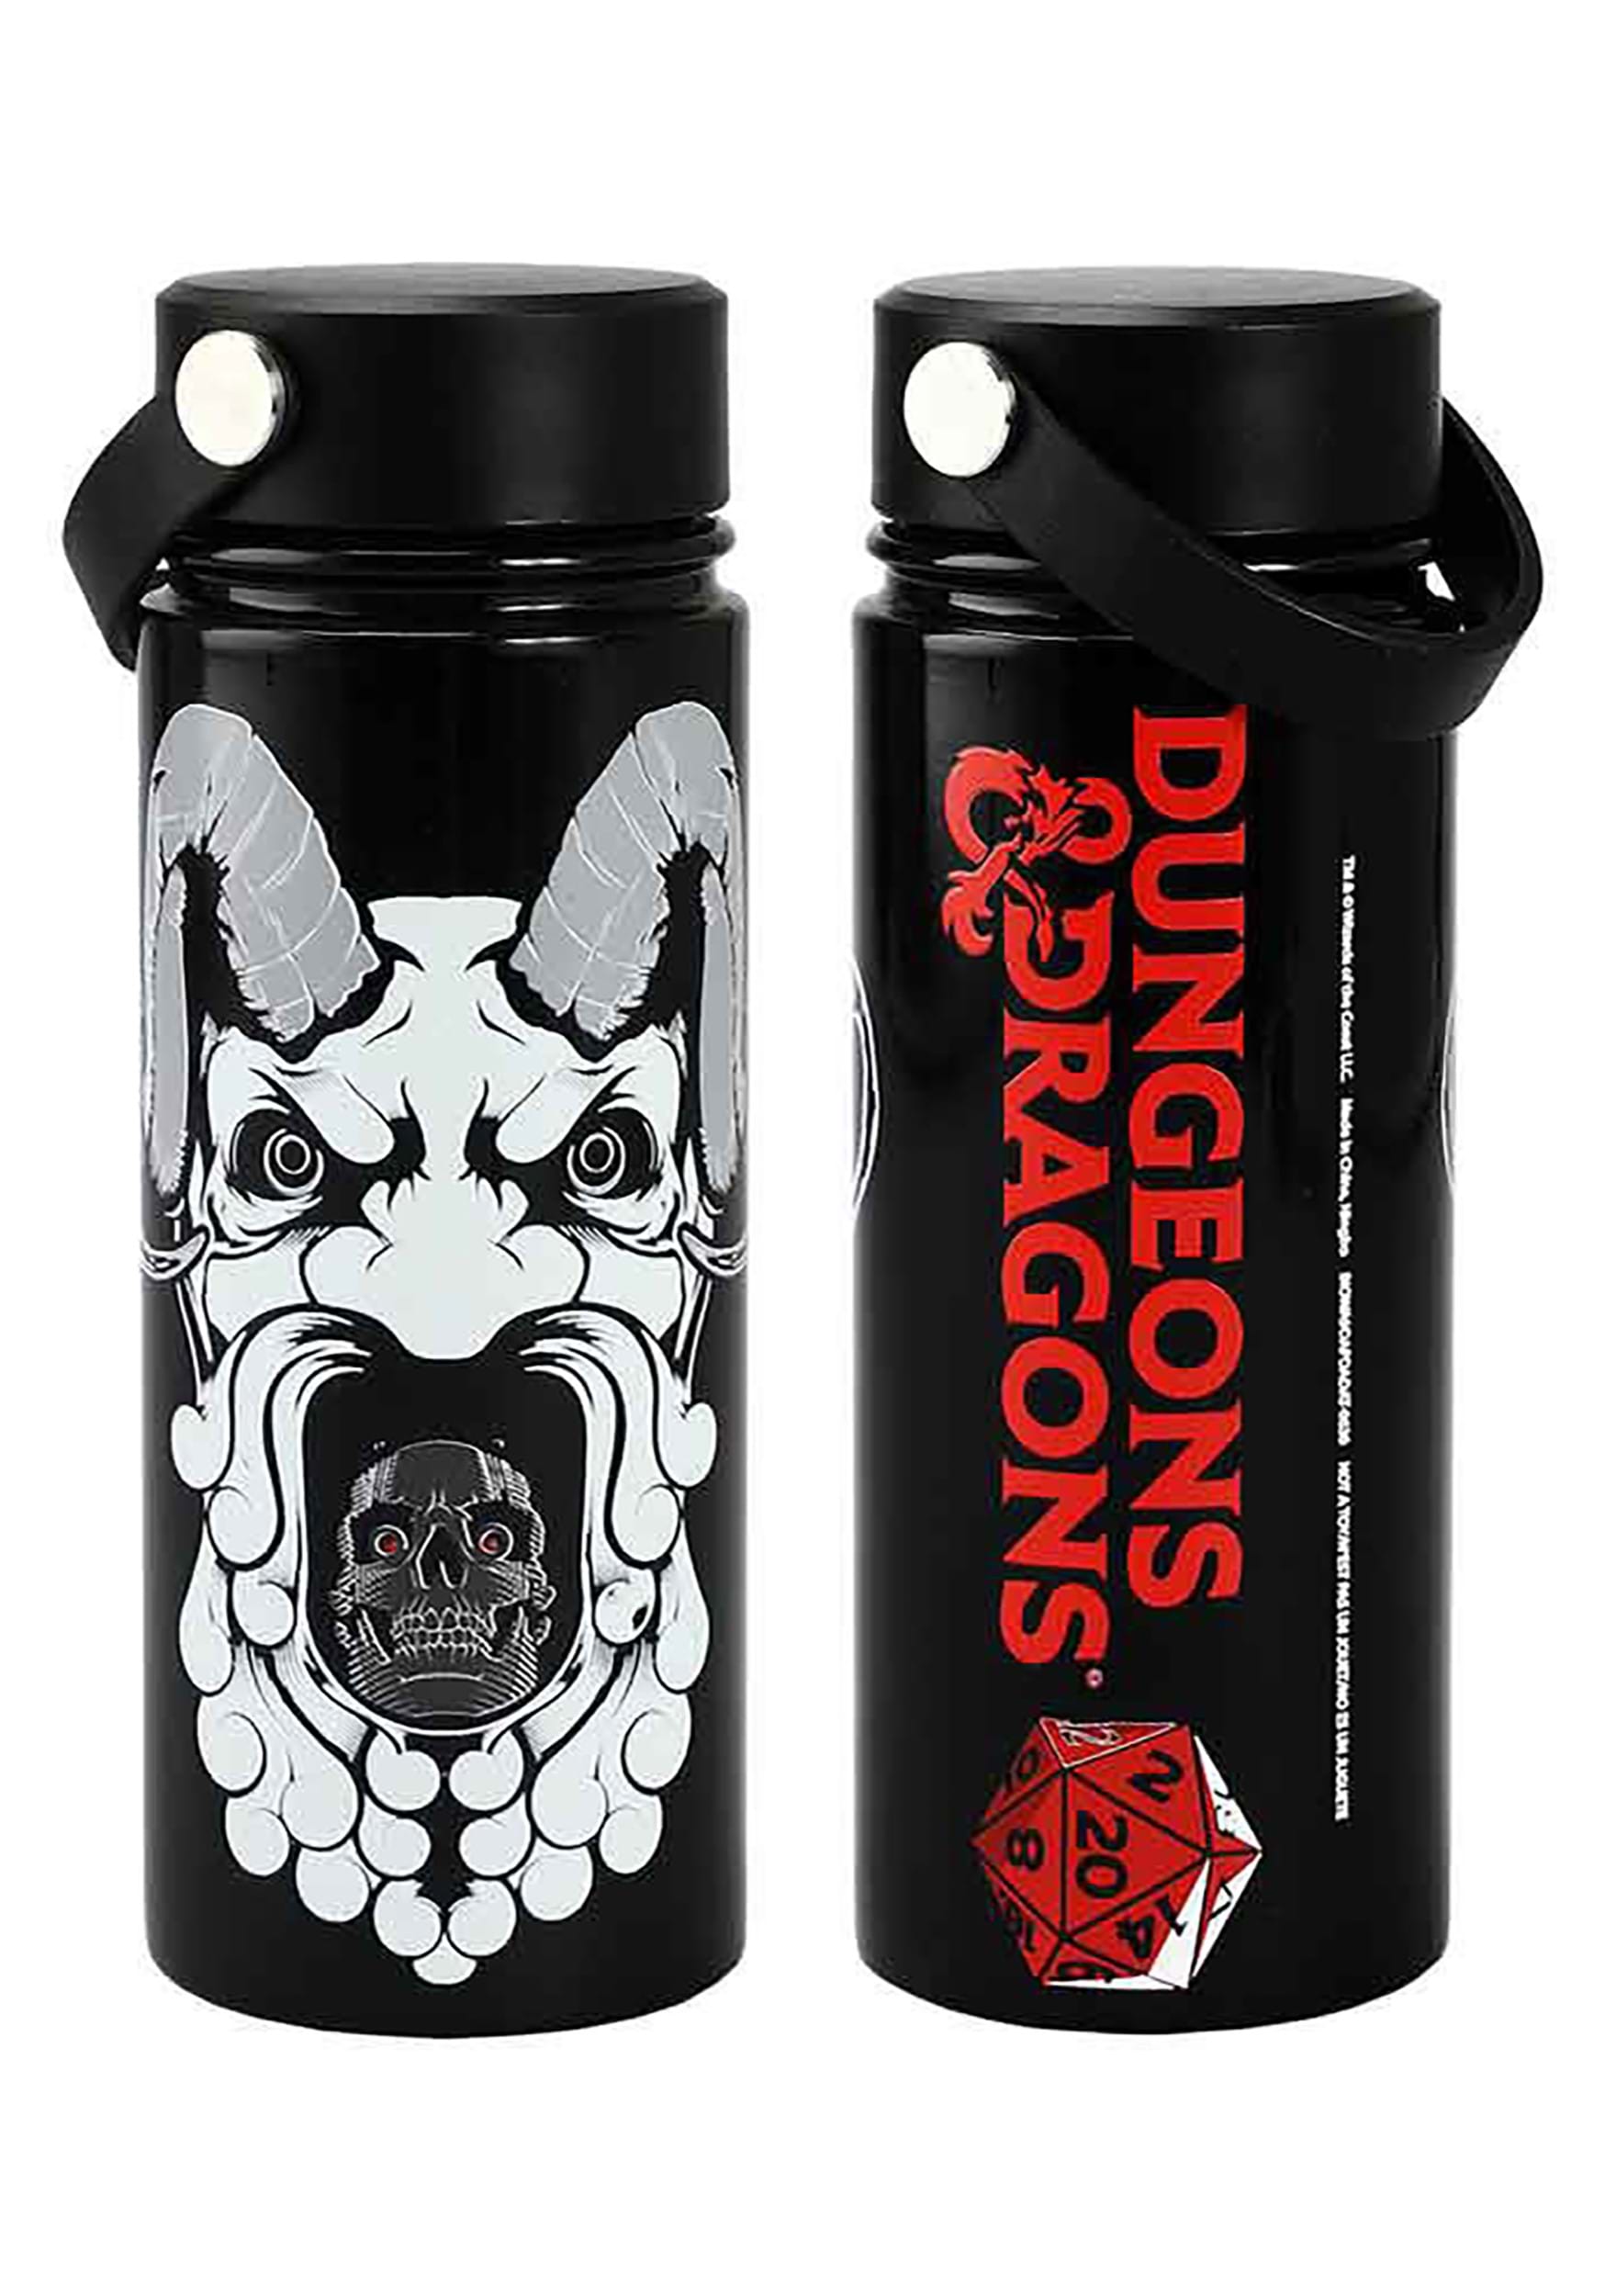 17 Oz. Dungeons and Dragons Stainless Steel Water Bottle